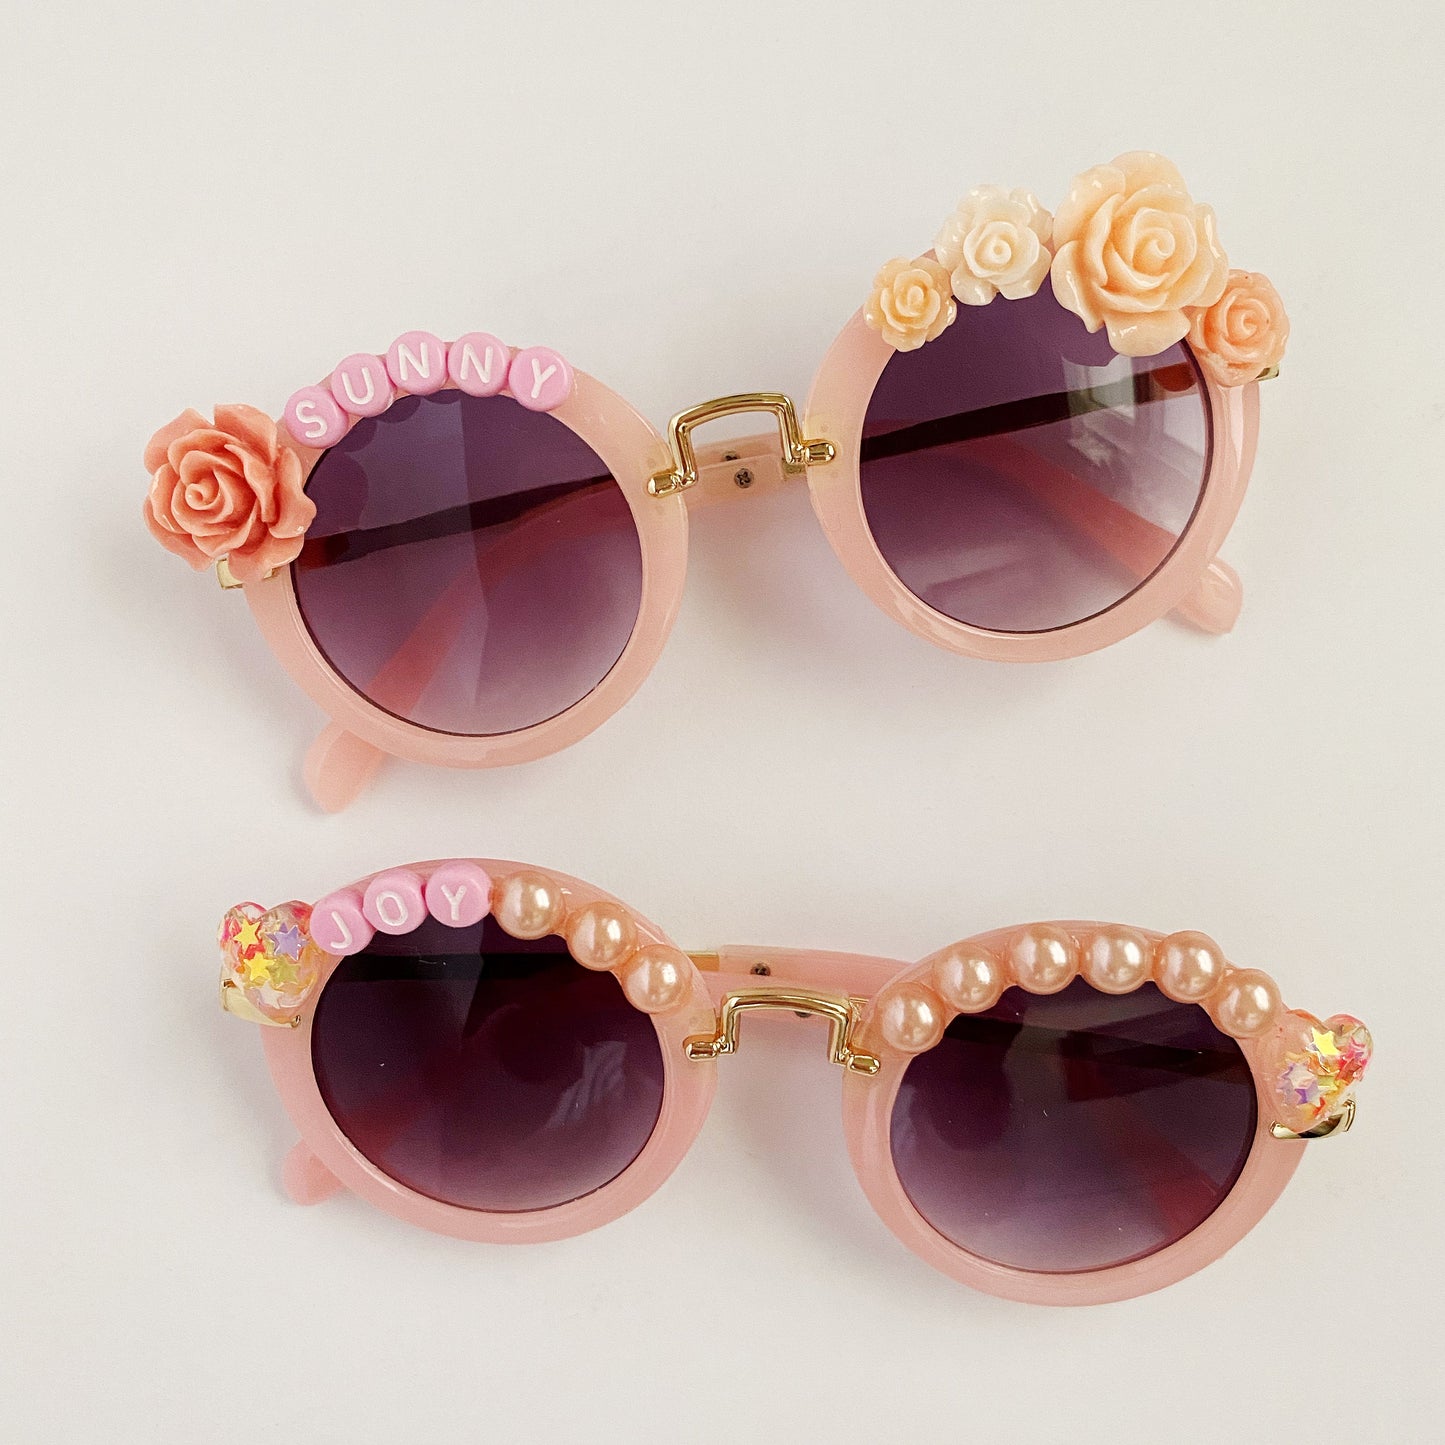 Retro Pink Sunnies, More Styles Available